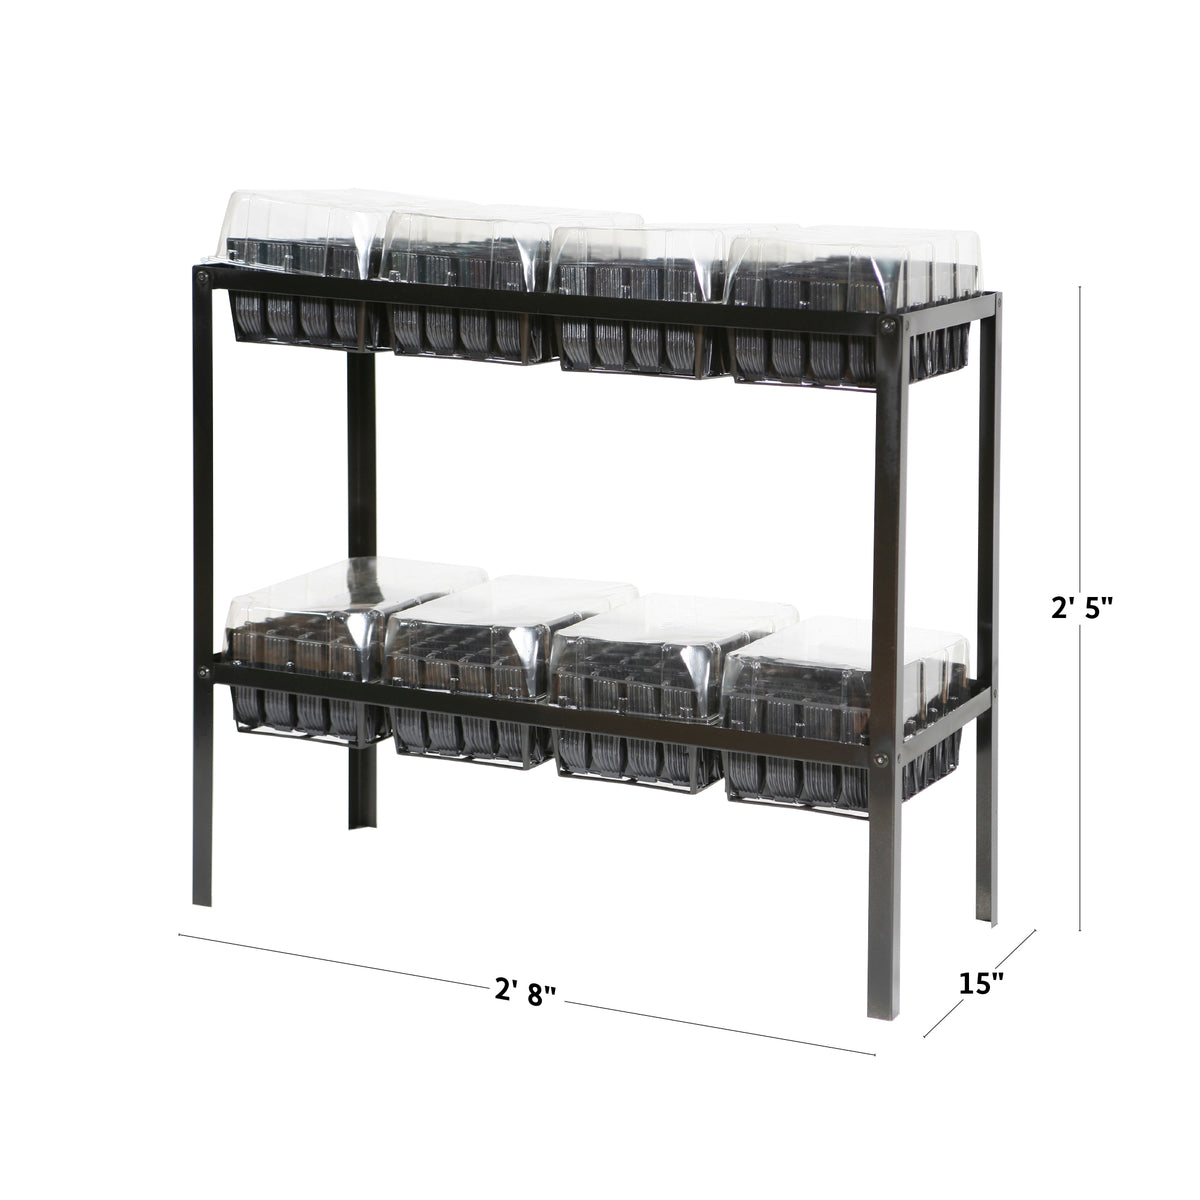 Haxnicks Rootrainer Racking Station w/ 8 Deep Rootrainers